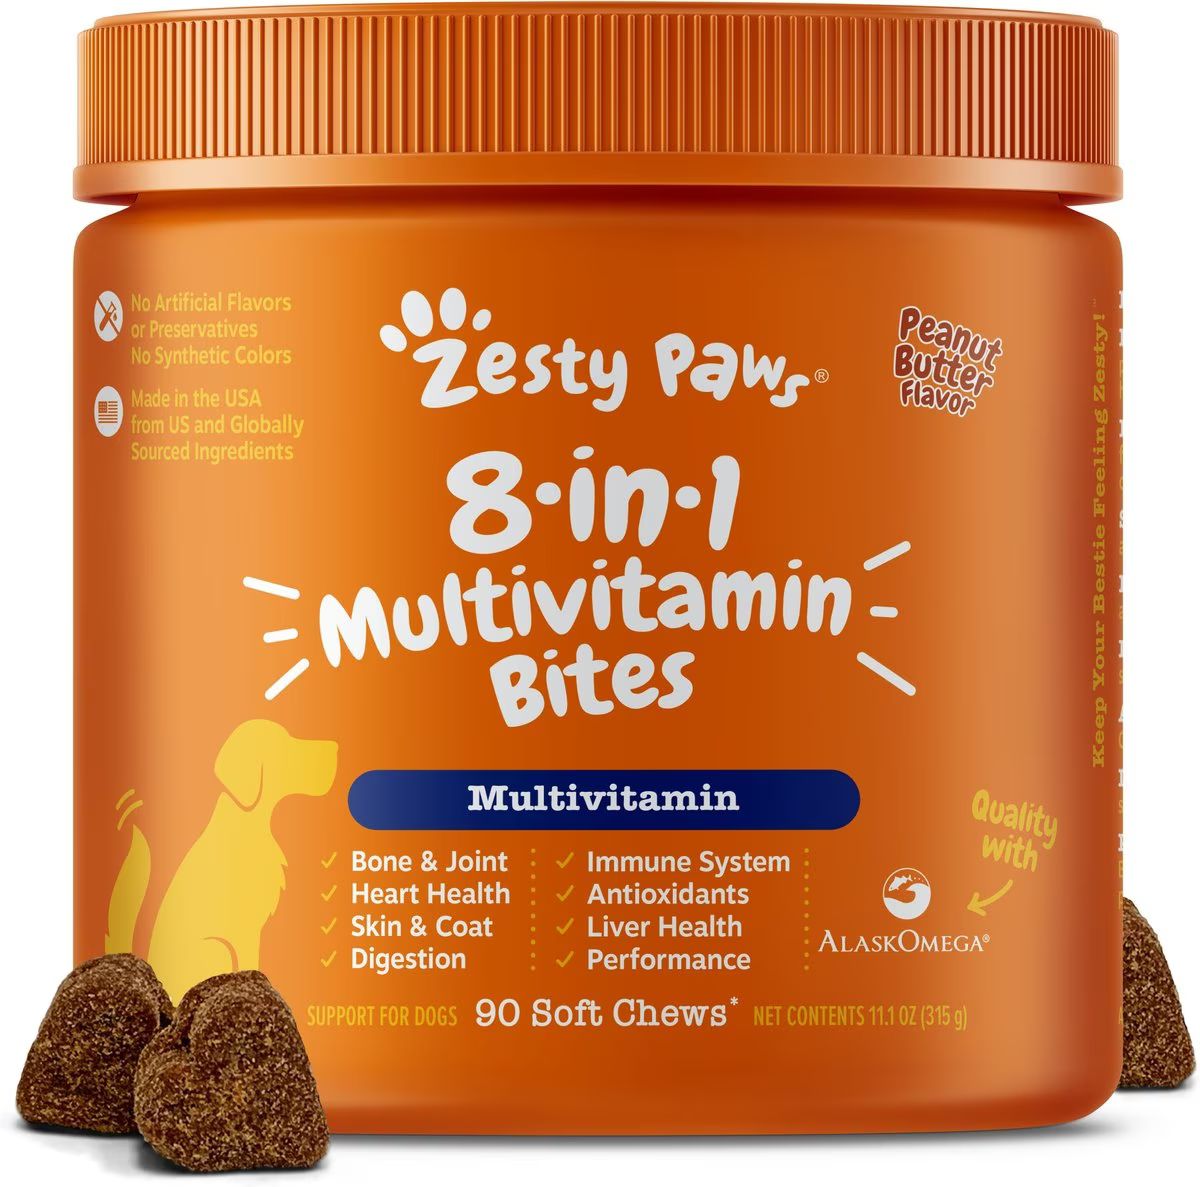 Zesty Paws 8-in-1 Bites Peanut Butter Flavored Soft Chews Multivitamin for Dogs | Chewy.com